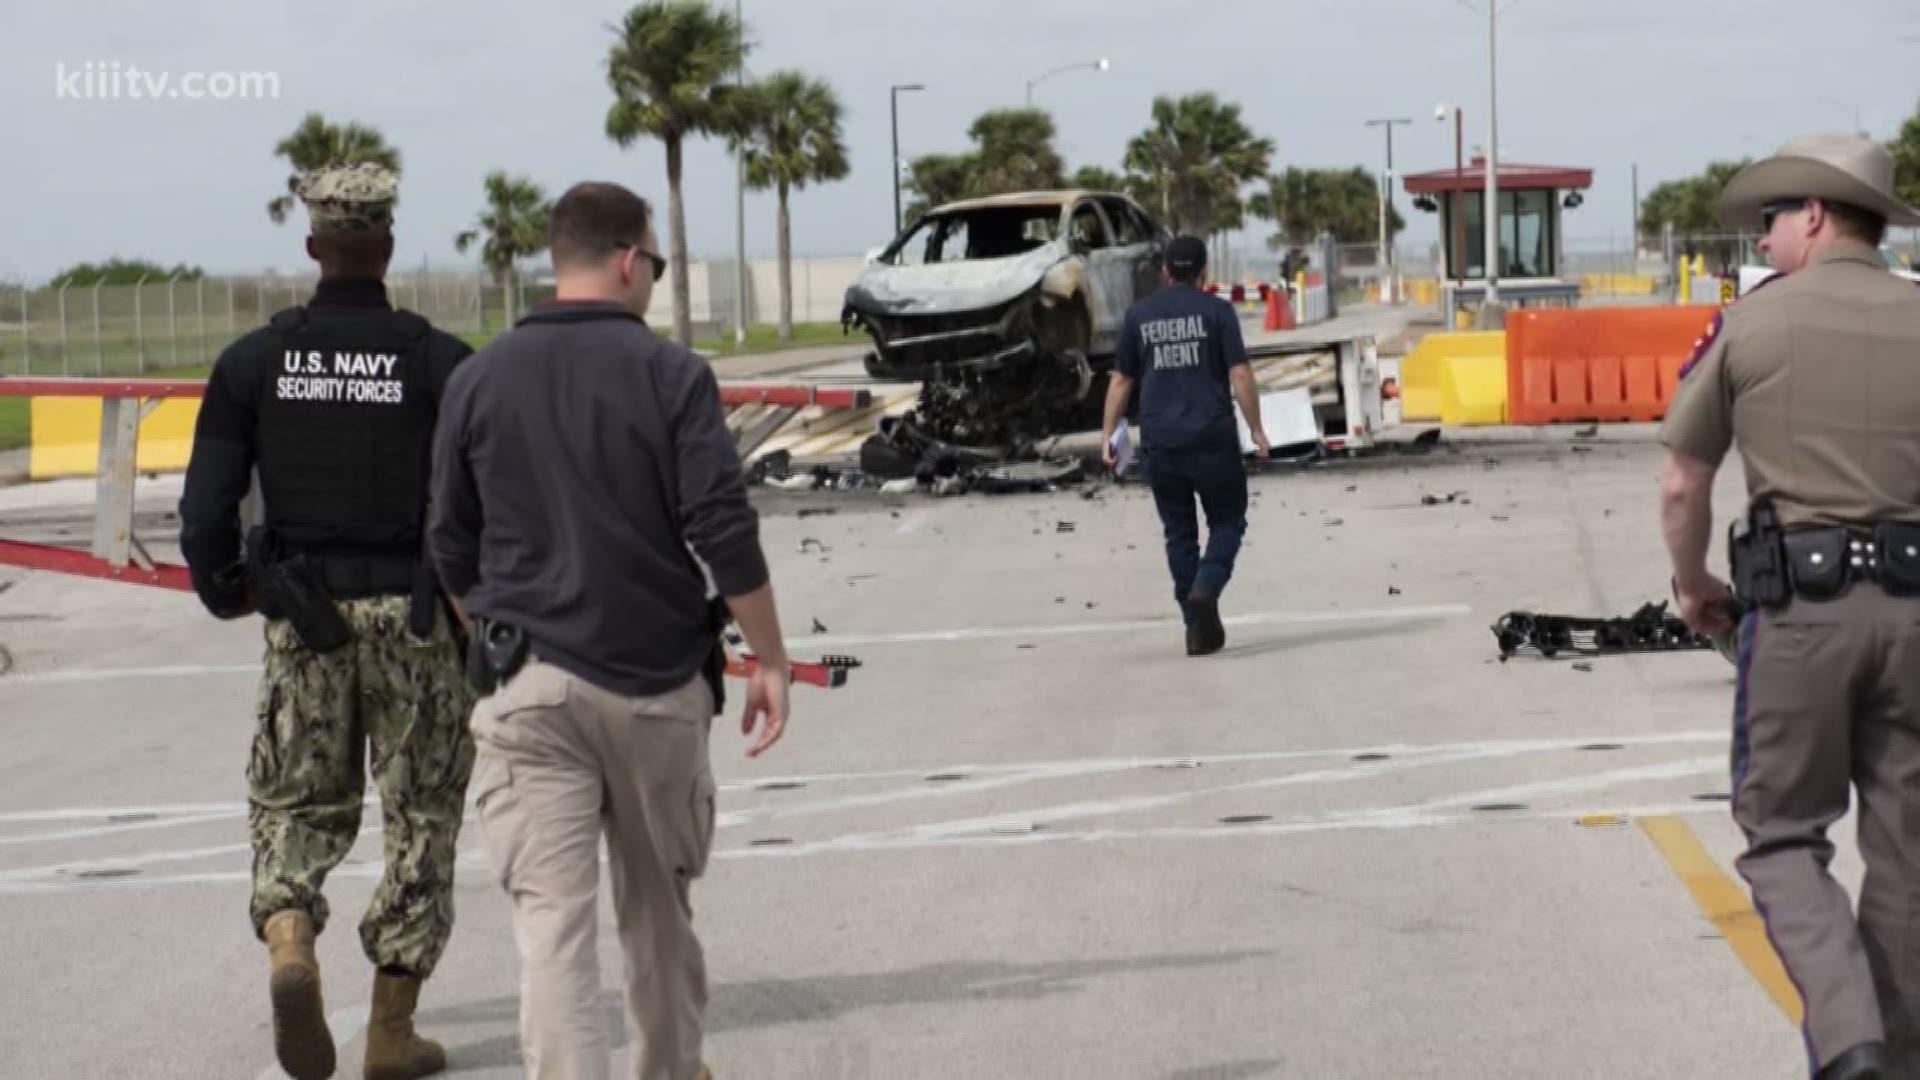 First responders were called to Naval Air Station-Corpus Christi's north gate on Ocean Drive Thursday morning after officials said a driver evading security personnel crashed into a barrier.